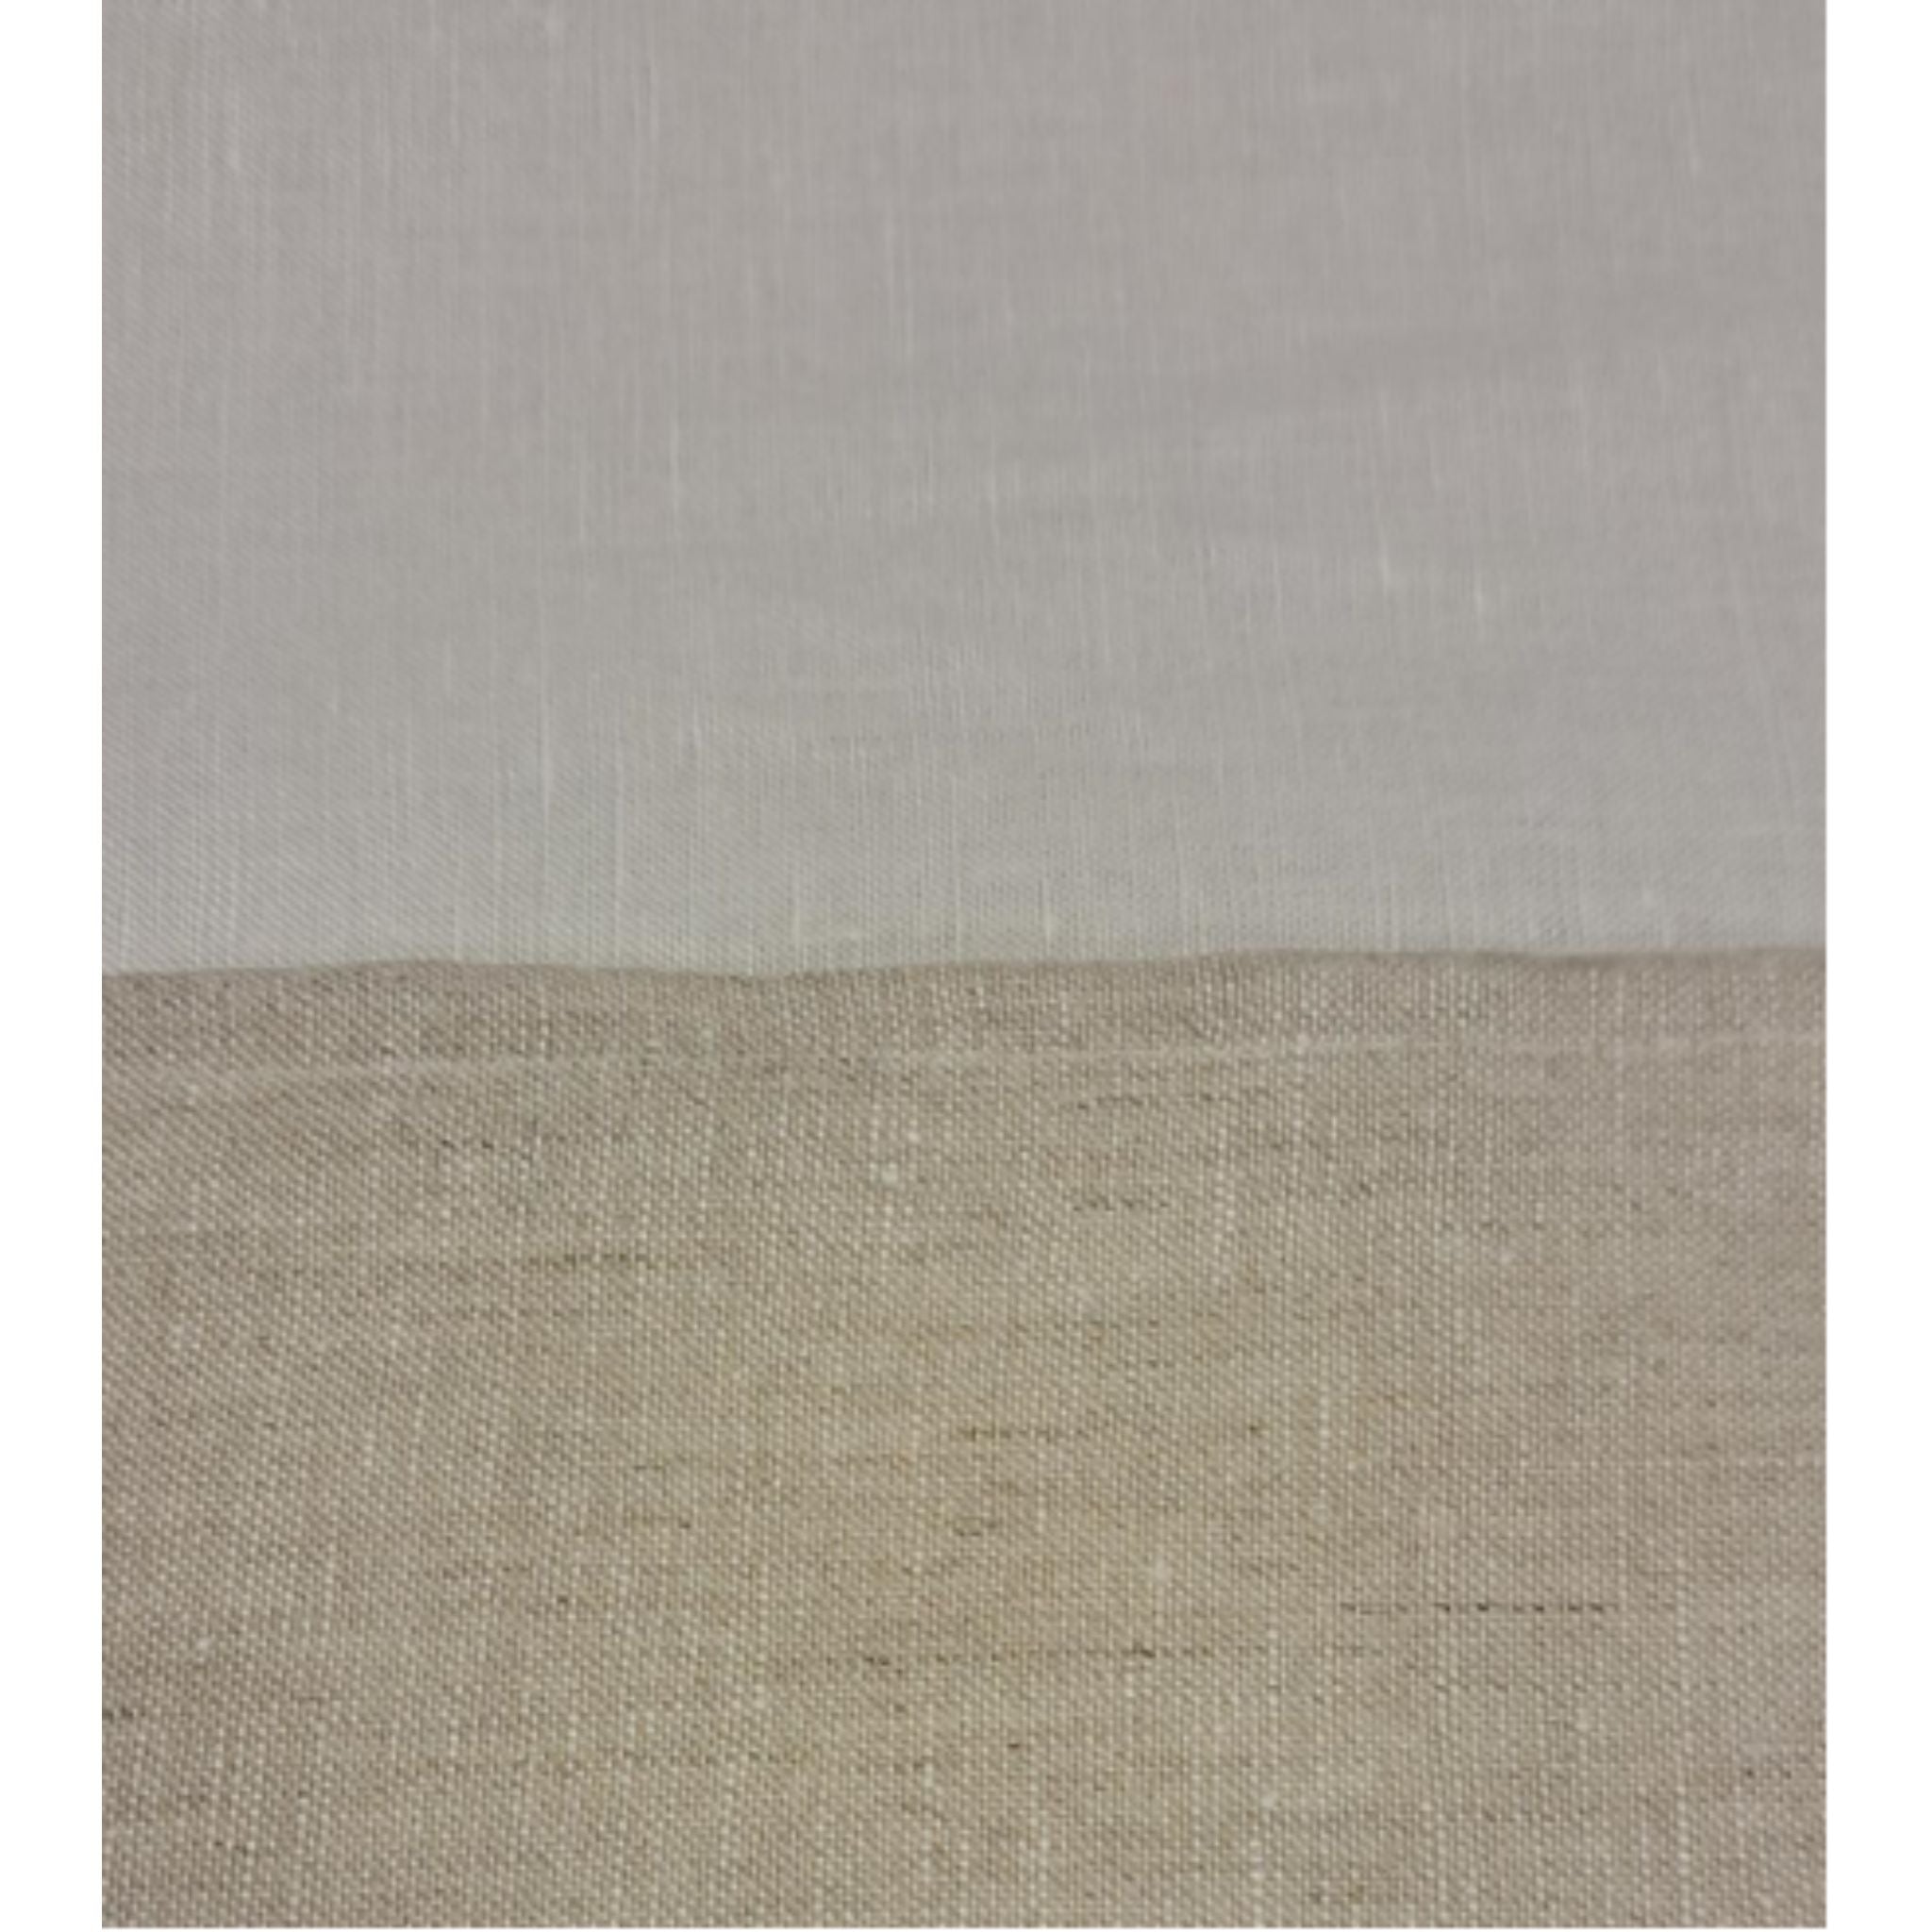 Linen cloth with ribbons